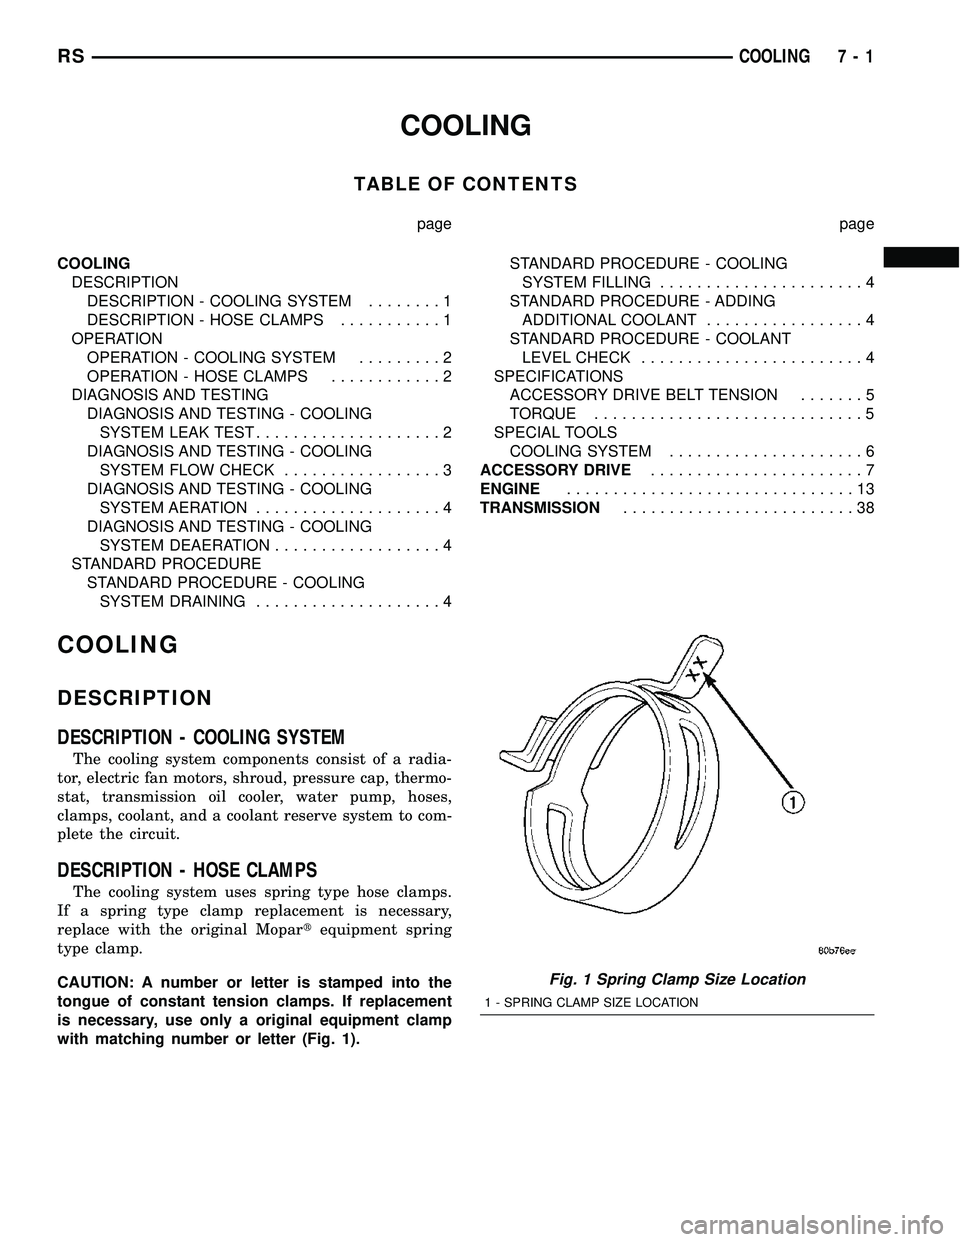 CHRYSLER VOYAGER 2005  Service Manual COOLING
TABLE OF CONTENTS
page page
COOLING
DESCRIPTION
DESCRIPTION - COOLING SYSTEM........1
DESCRIPTION - HOSE CLAMPS...........1
OPERATION
OPERATION - COOLING SYSTEM.........2
OPERATION - HOSE CLAM